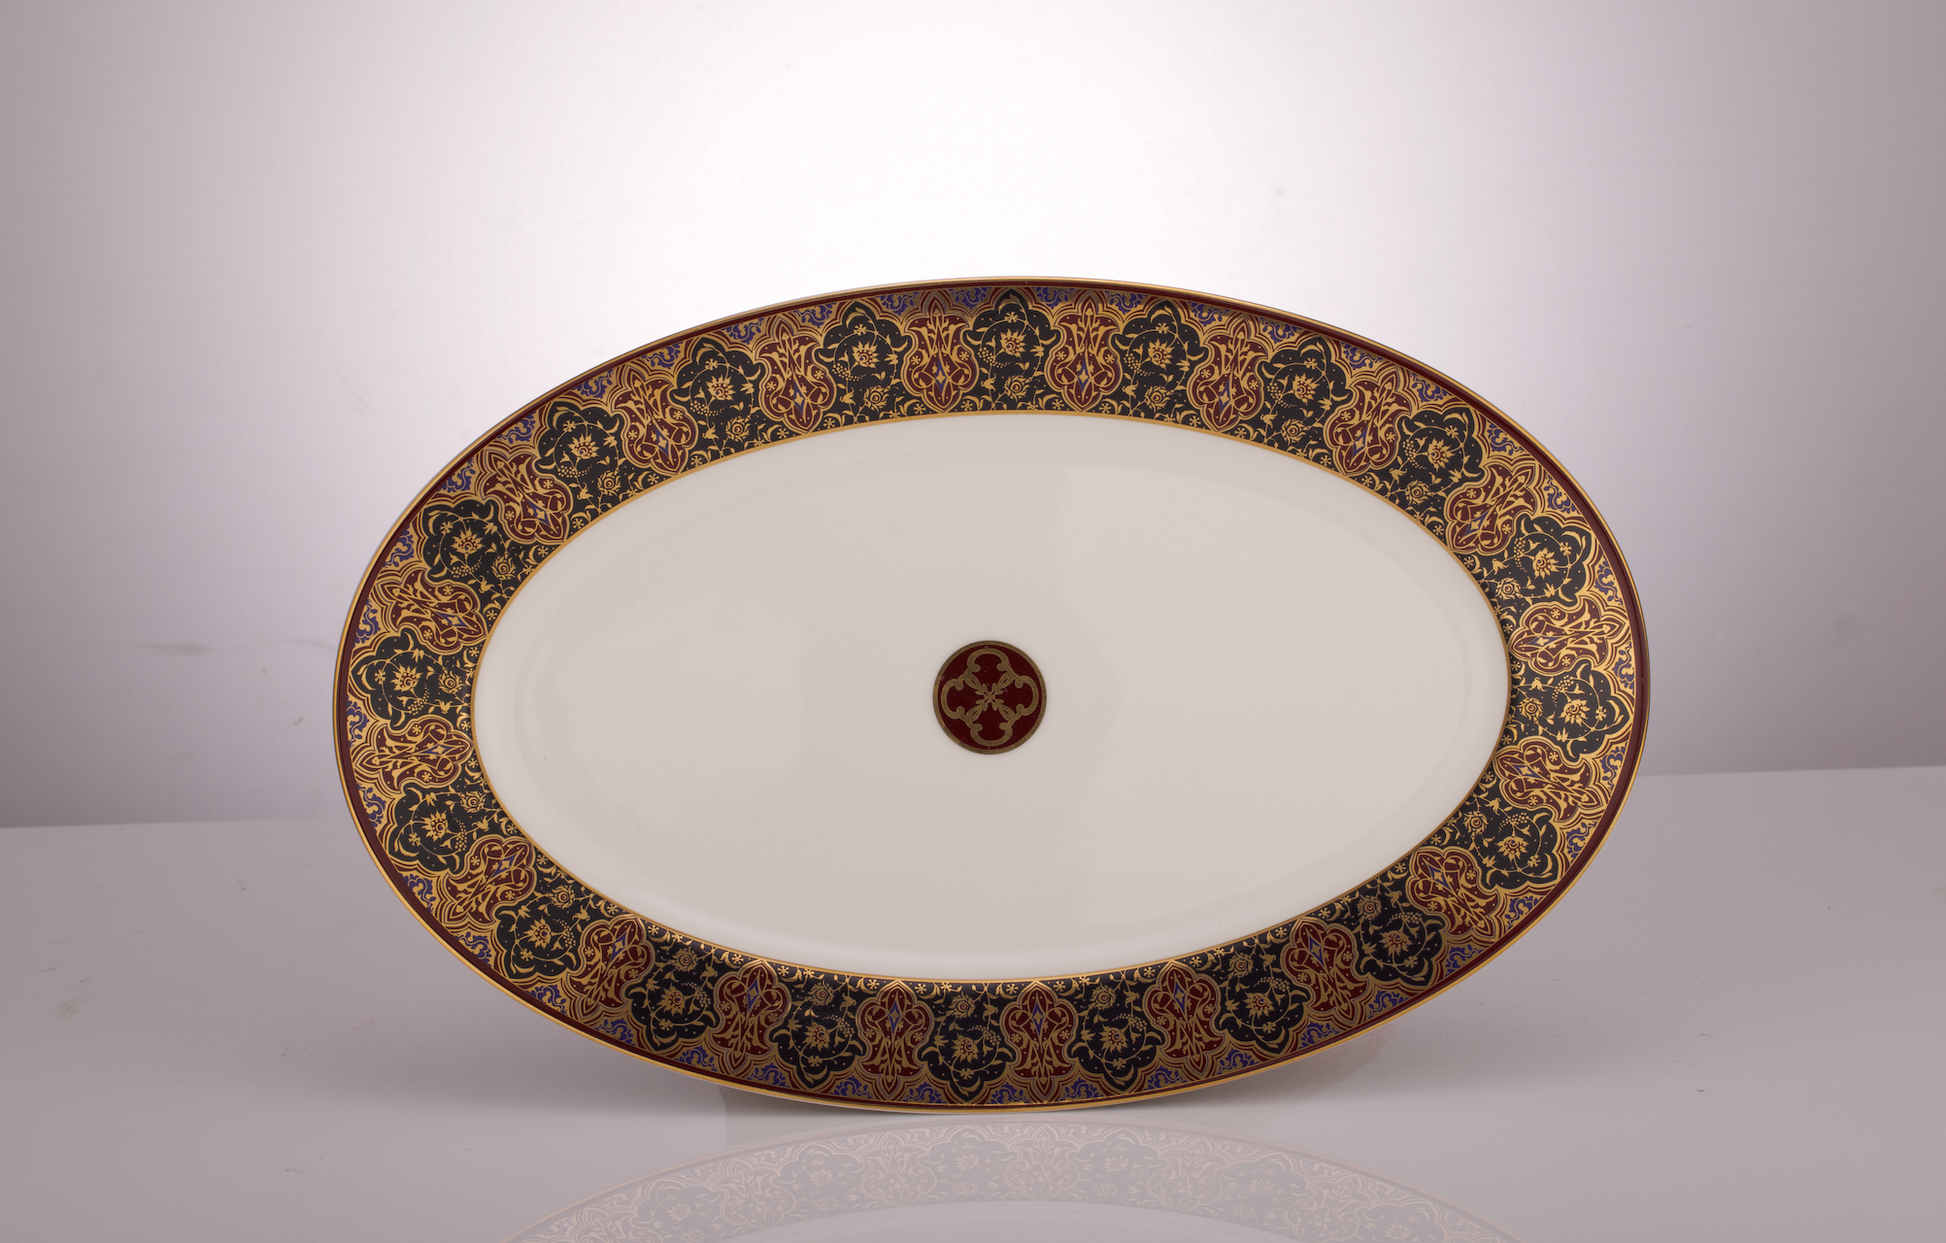 Begum collection's Platter